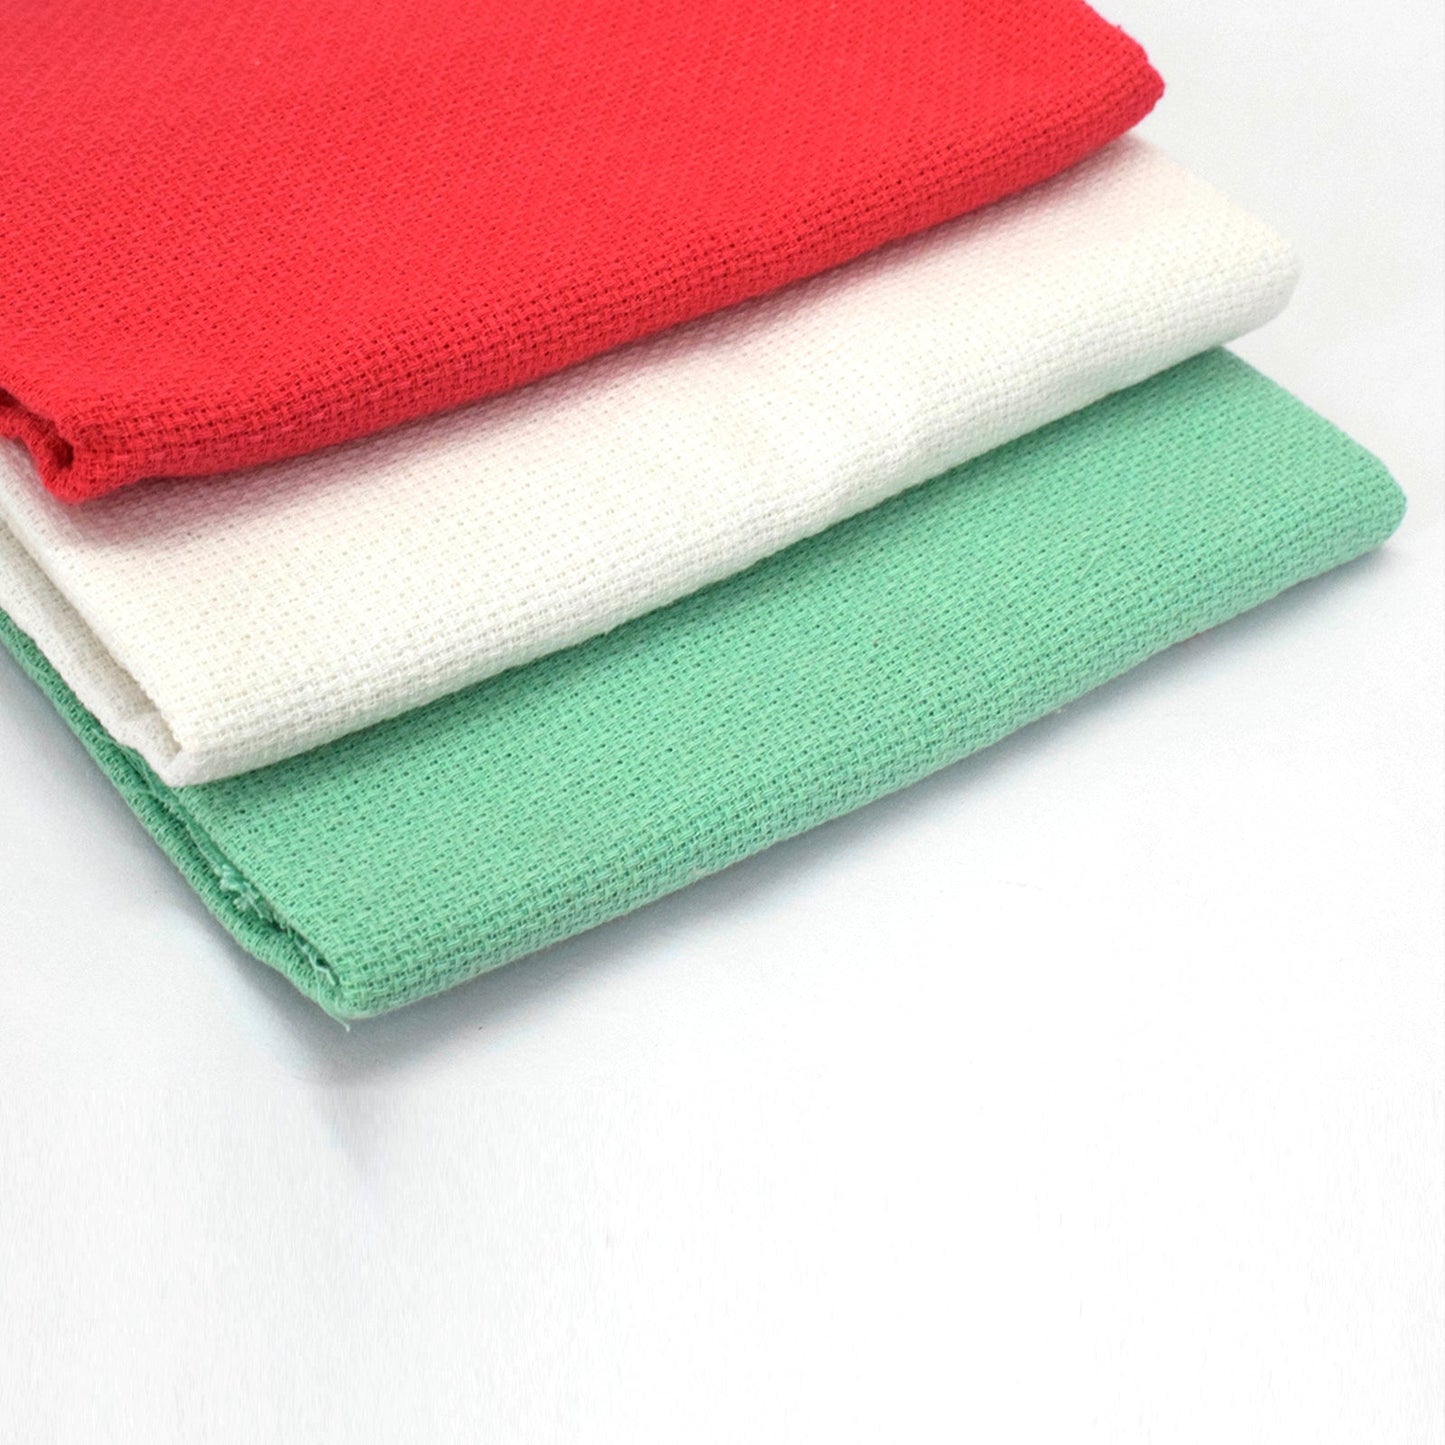 Matty Fabric Combo of 3 White, Teal and Red 16x20 Inch